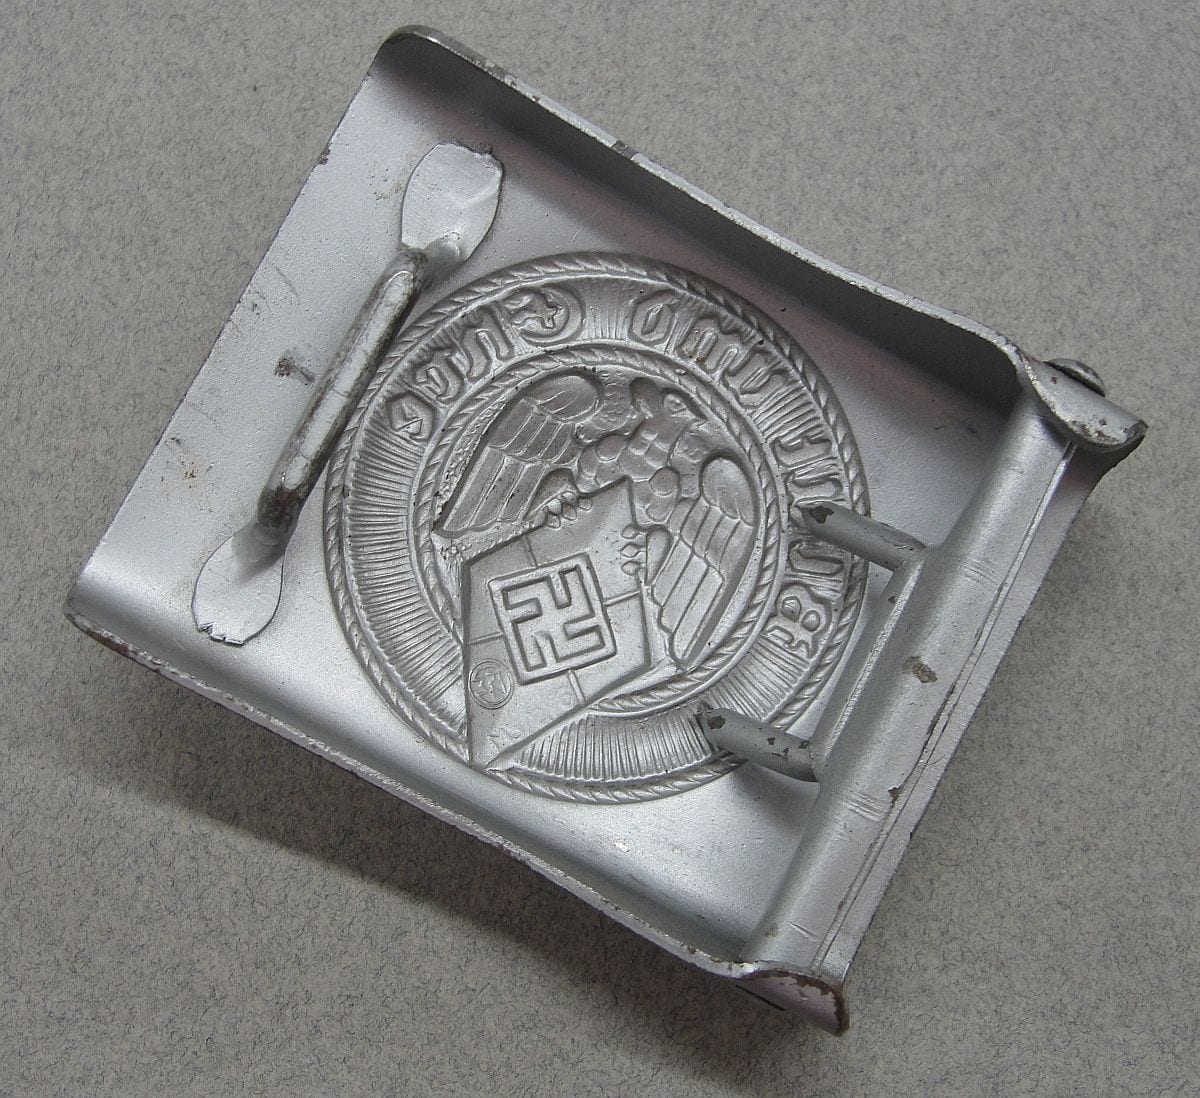 Hitler Youth Belt Buckle by "RZM M5/276"